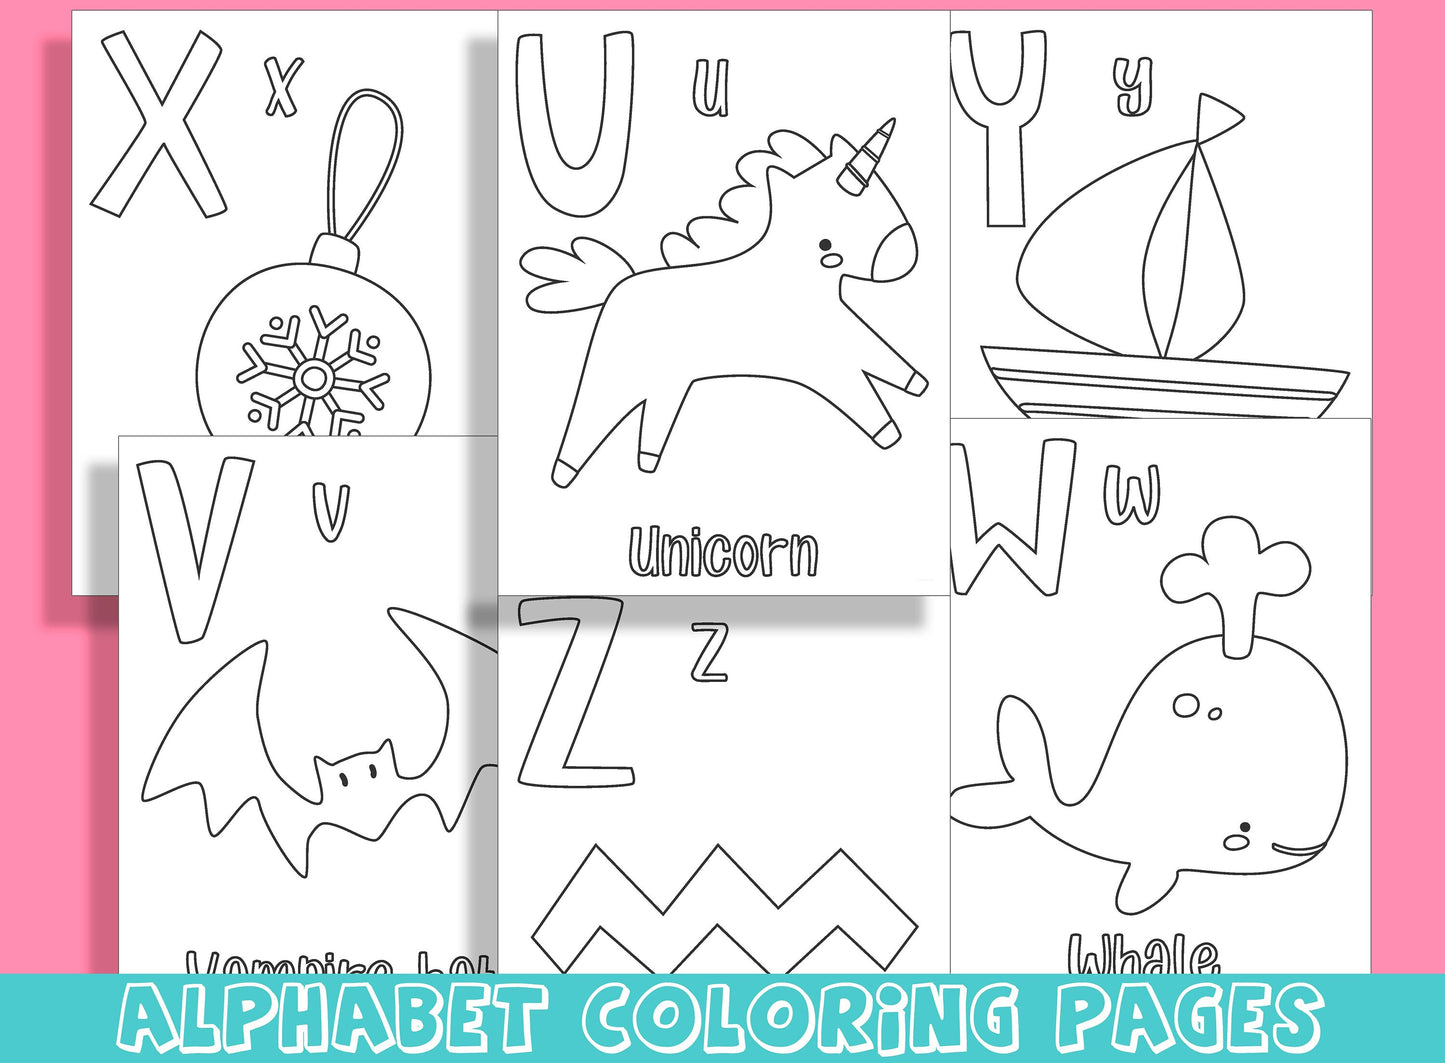 Color the Alphabet: Fun and Educational Coloring Pages for Kids, Upper Case (Capital) and Lower Case, PDF File, Instant Download